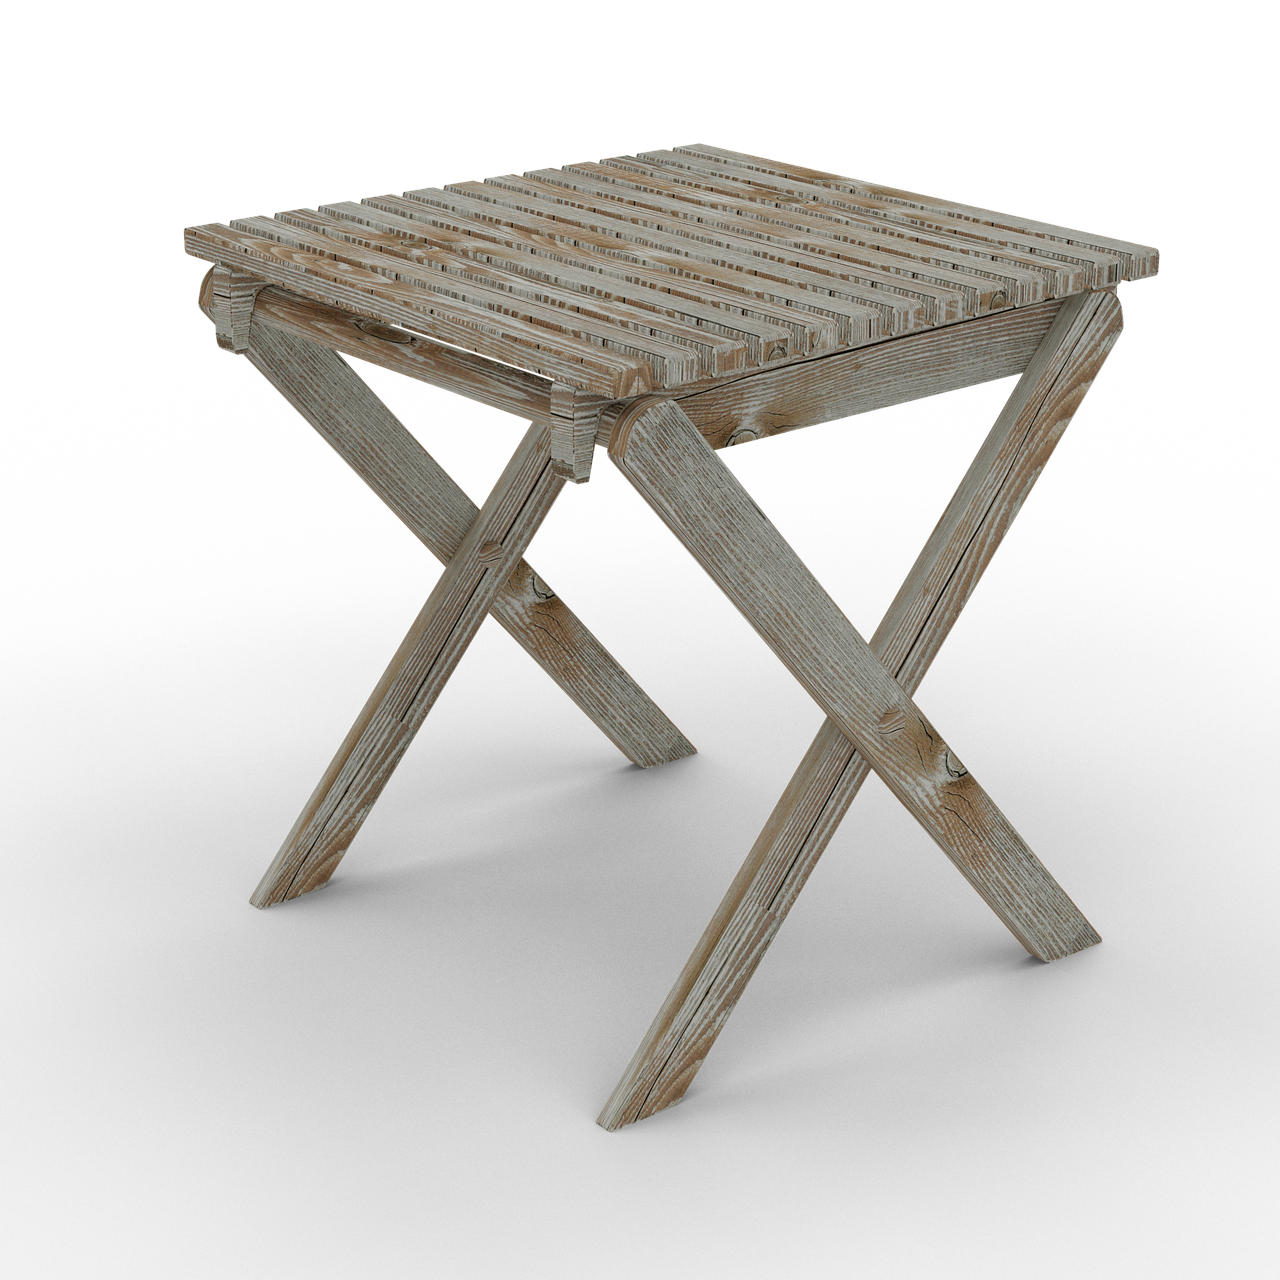 folding chair old wooden chair stool free photo